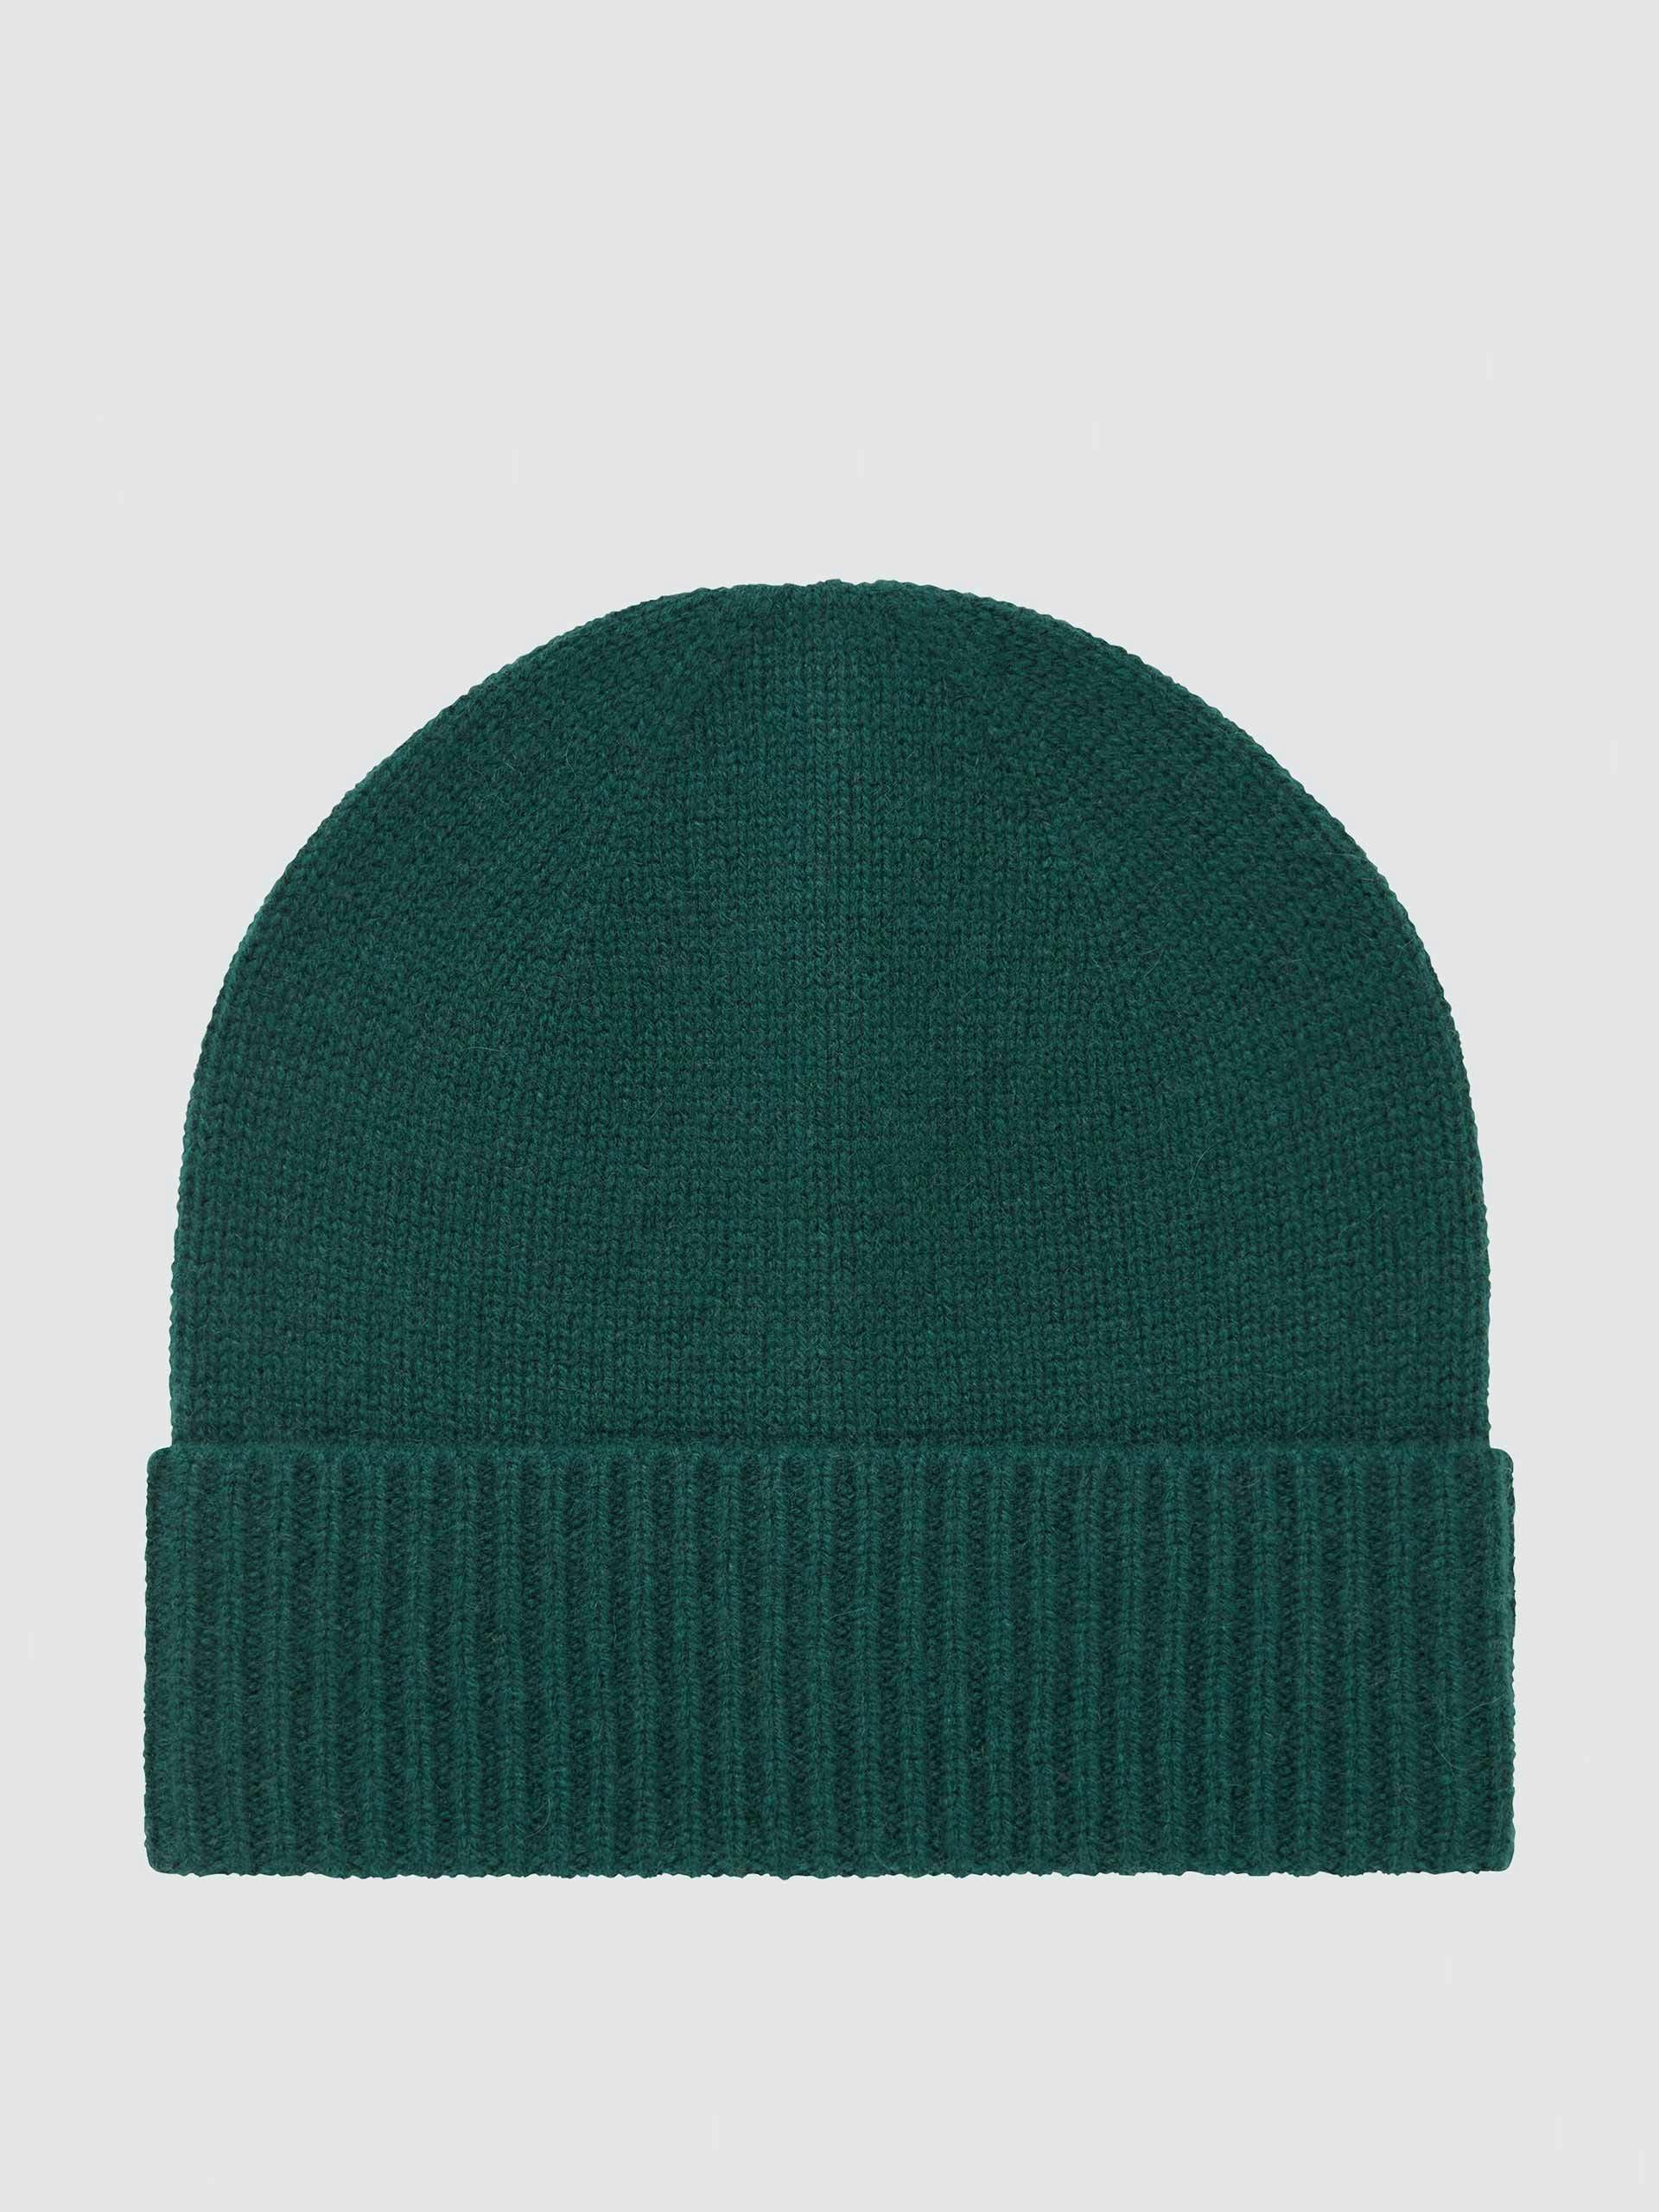 Green cashmere knitted beanie hat